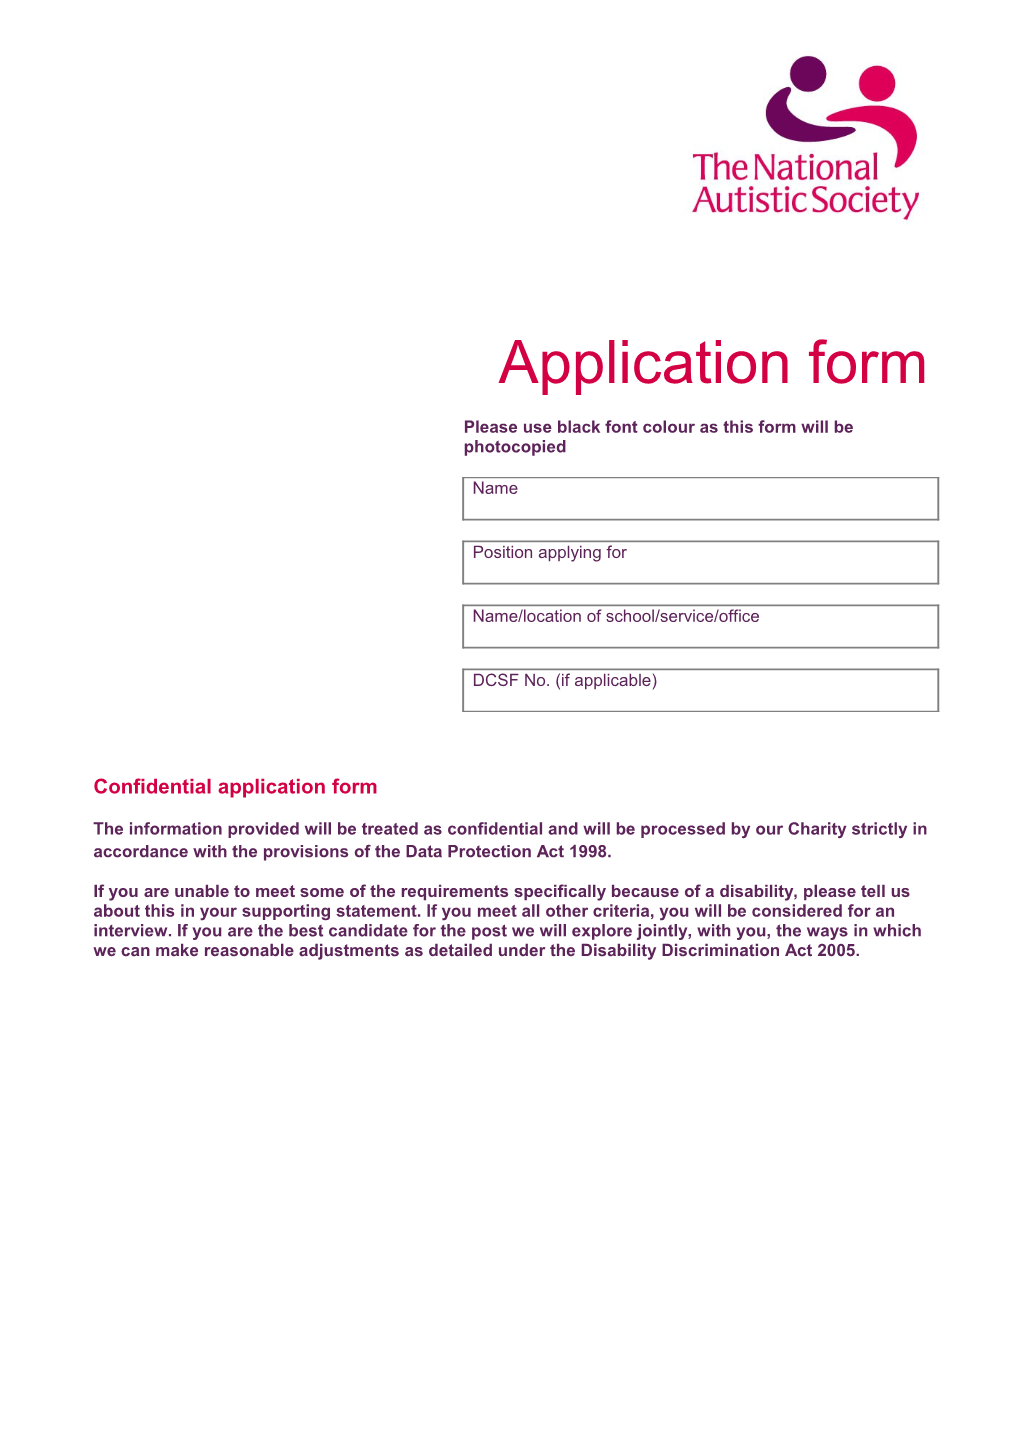 Please Use Black Font Colour As This Form Will Be Photocopied